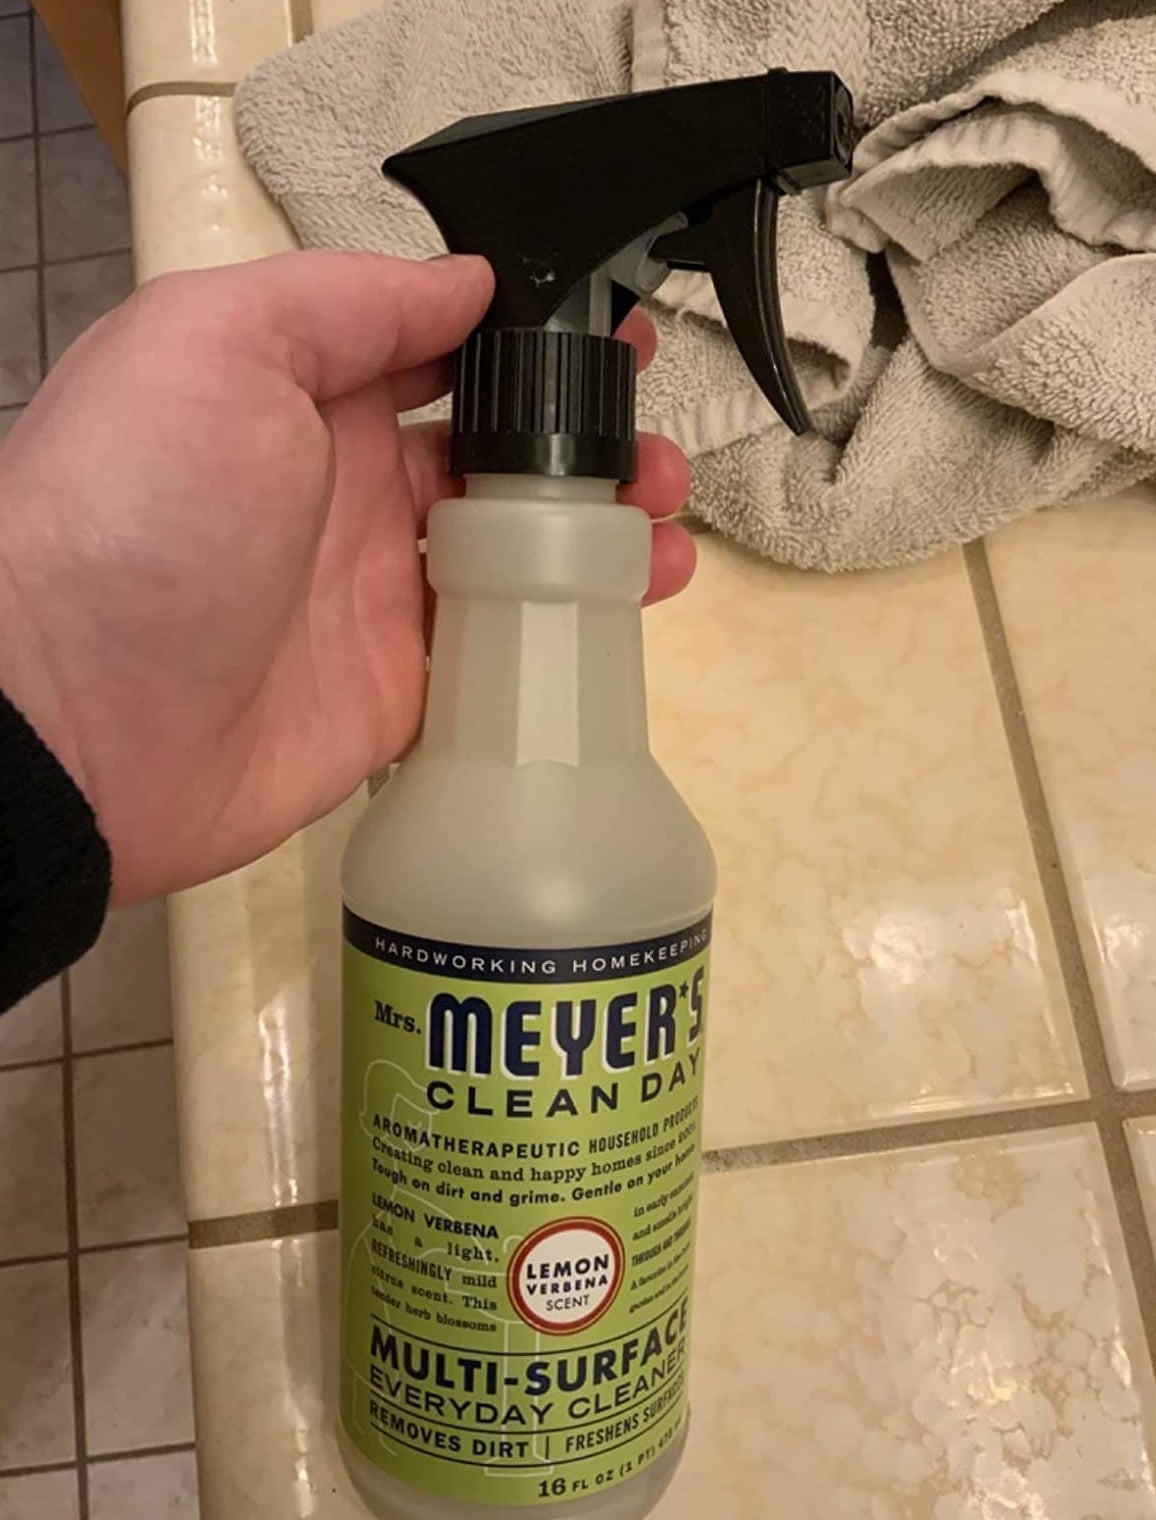 Image of reviewer holding the spray bottle